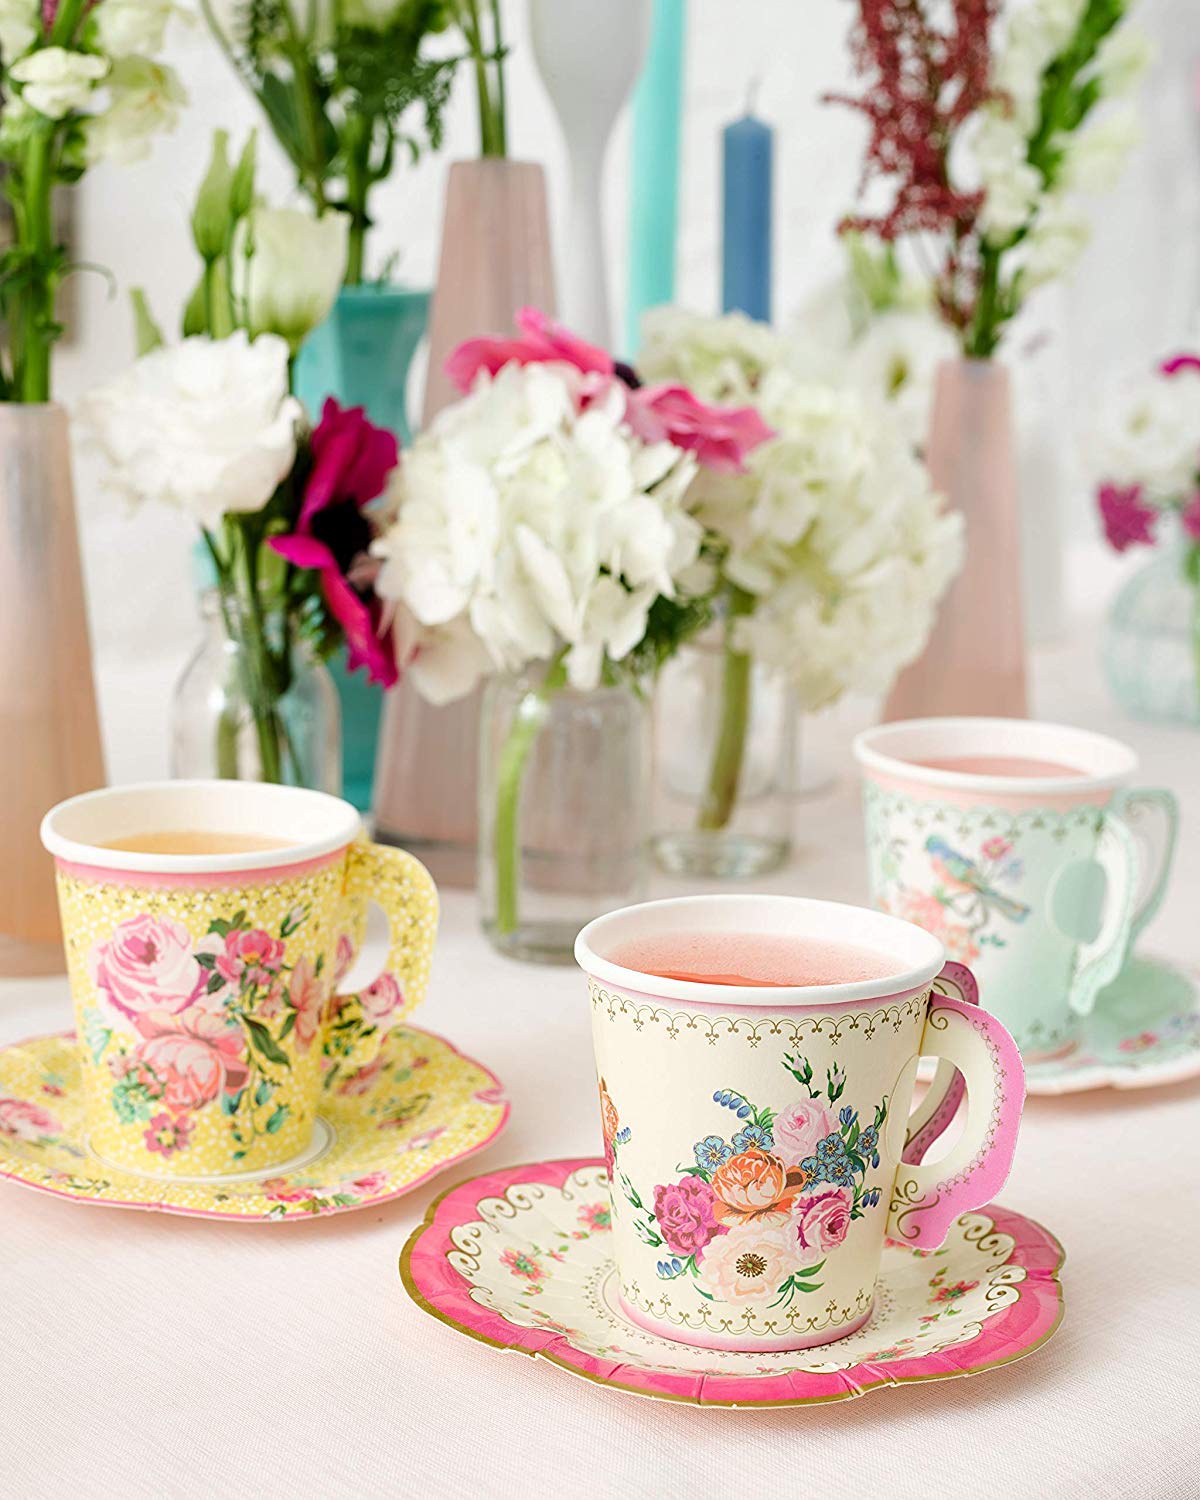 Talking Tables 24 Count Truly Scrumptious Party Vintage Floral Tea Cups and Saucer Sets